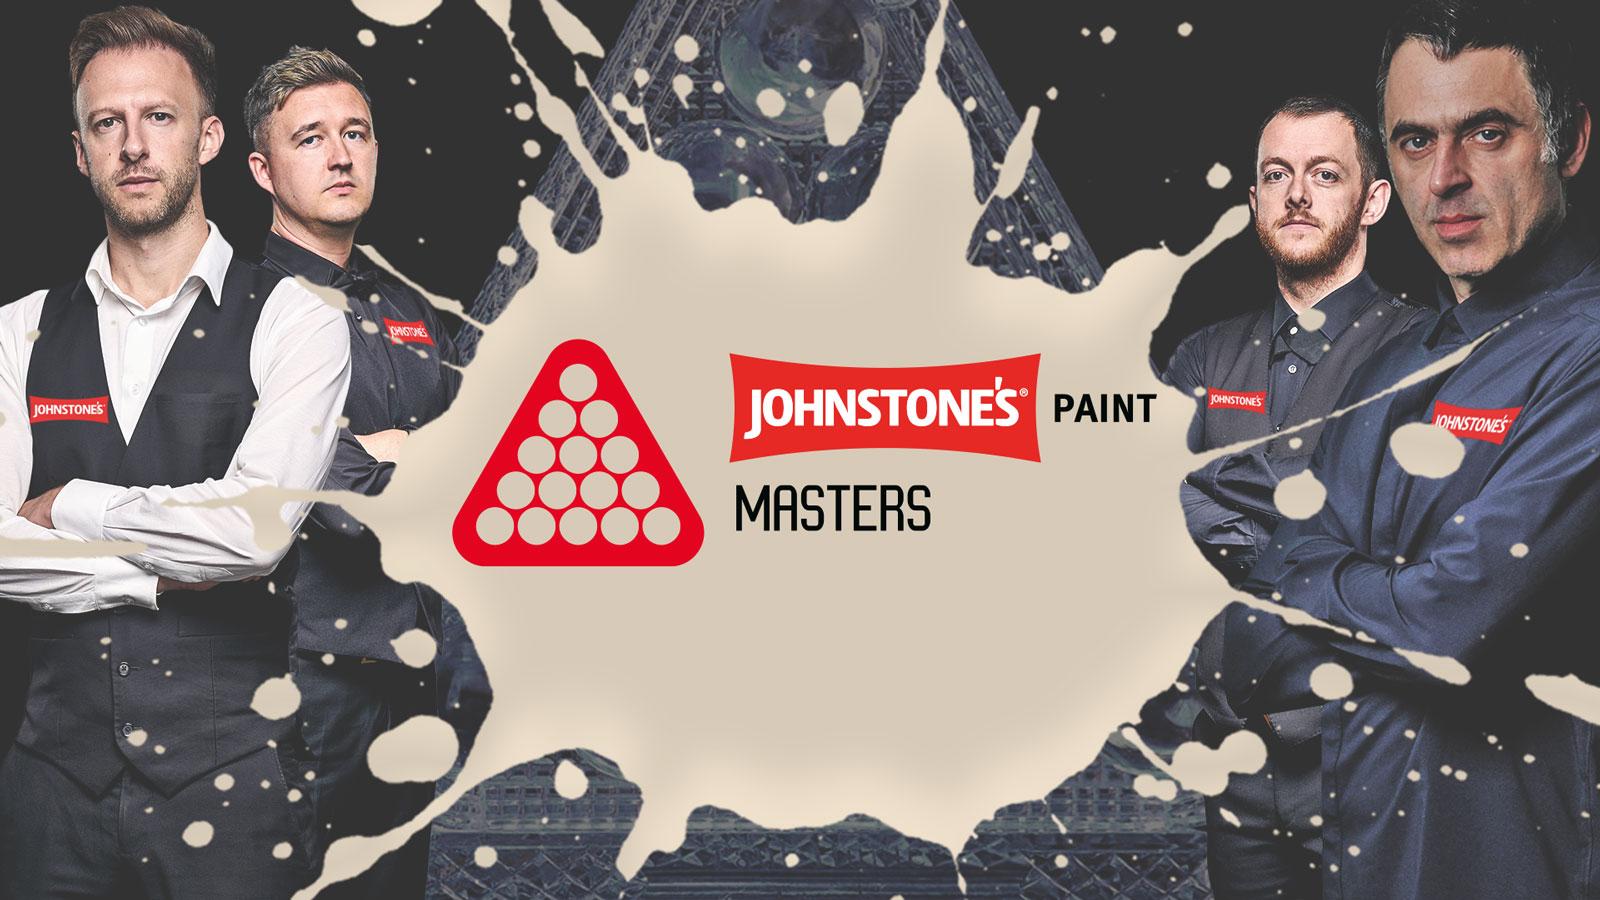 Image of snooker players sponsored by Johnstone's Paint